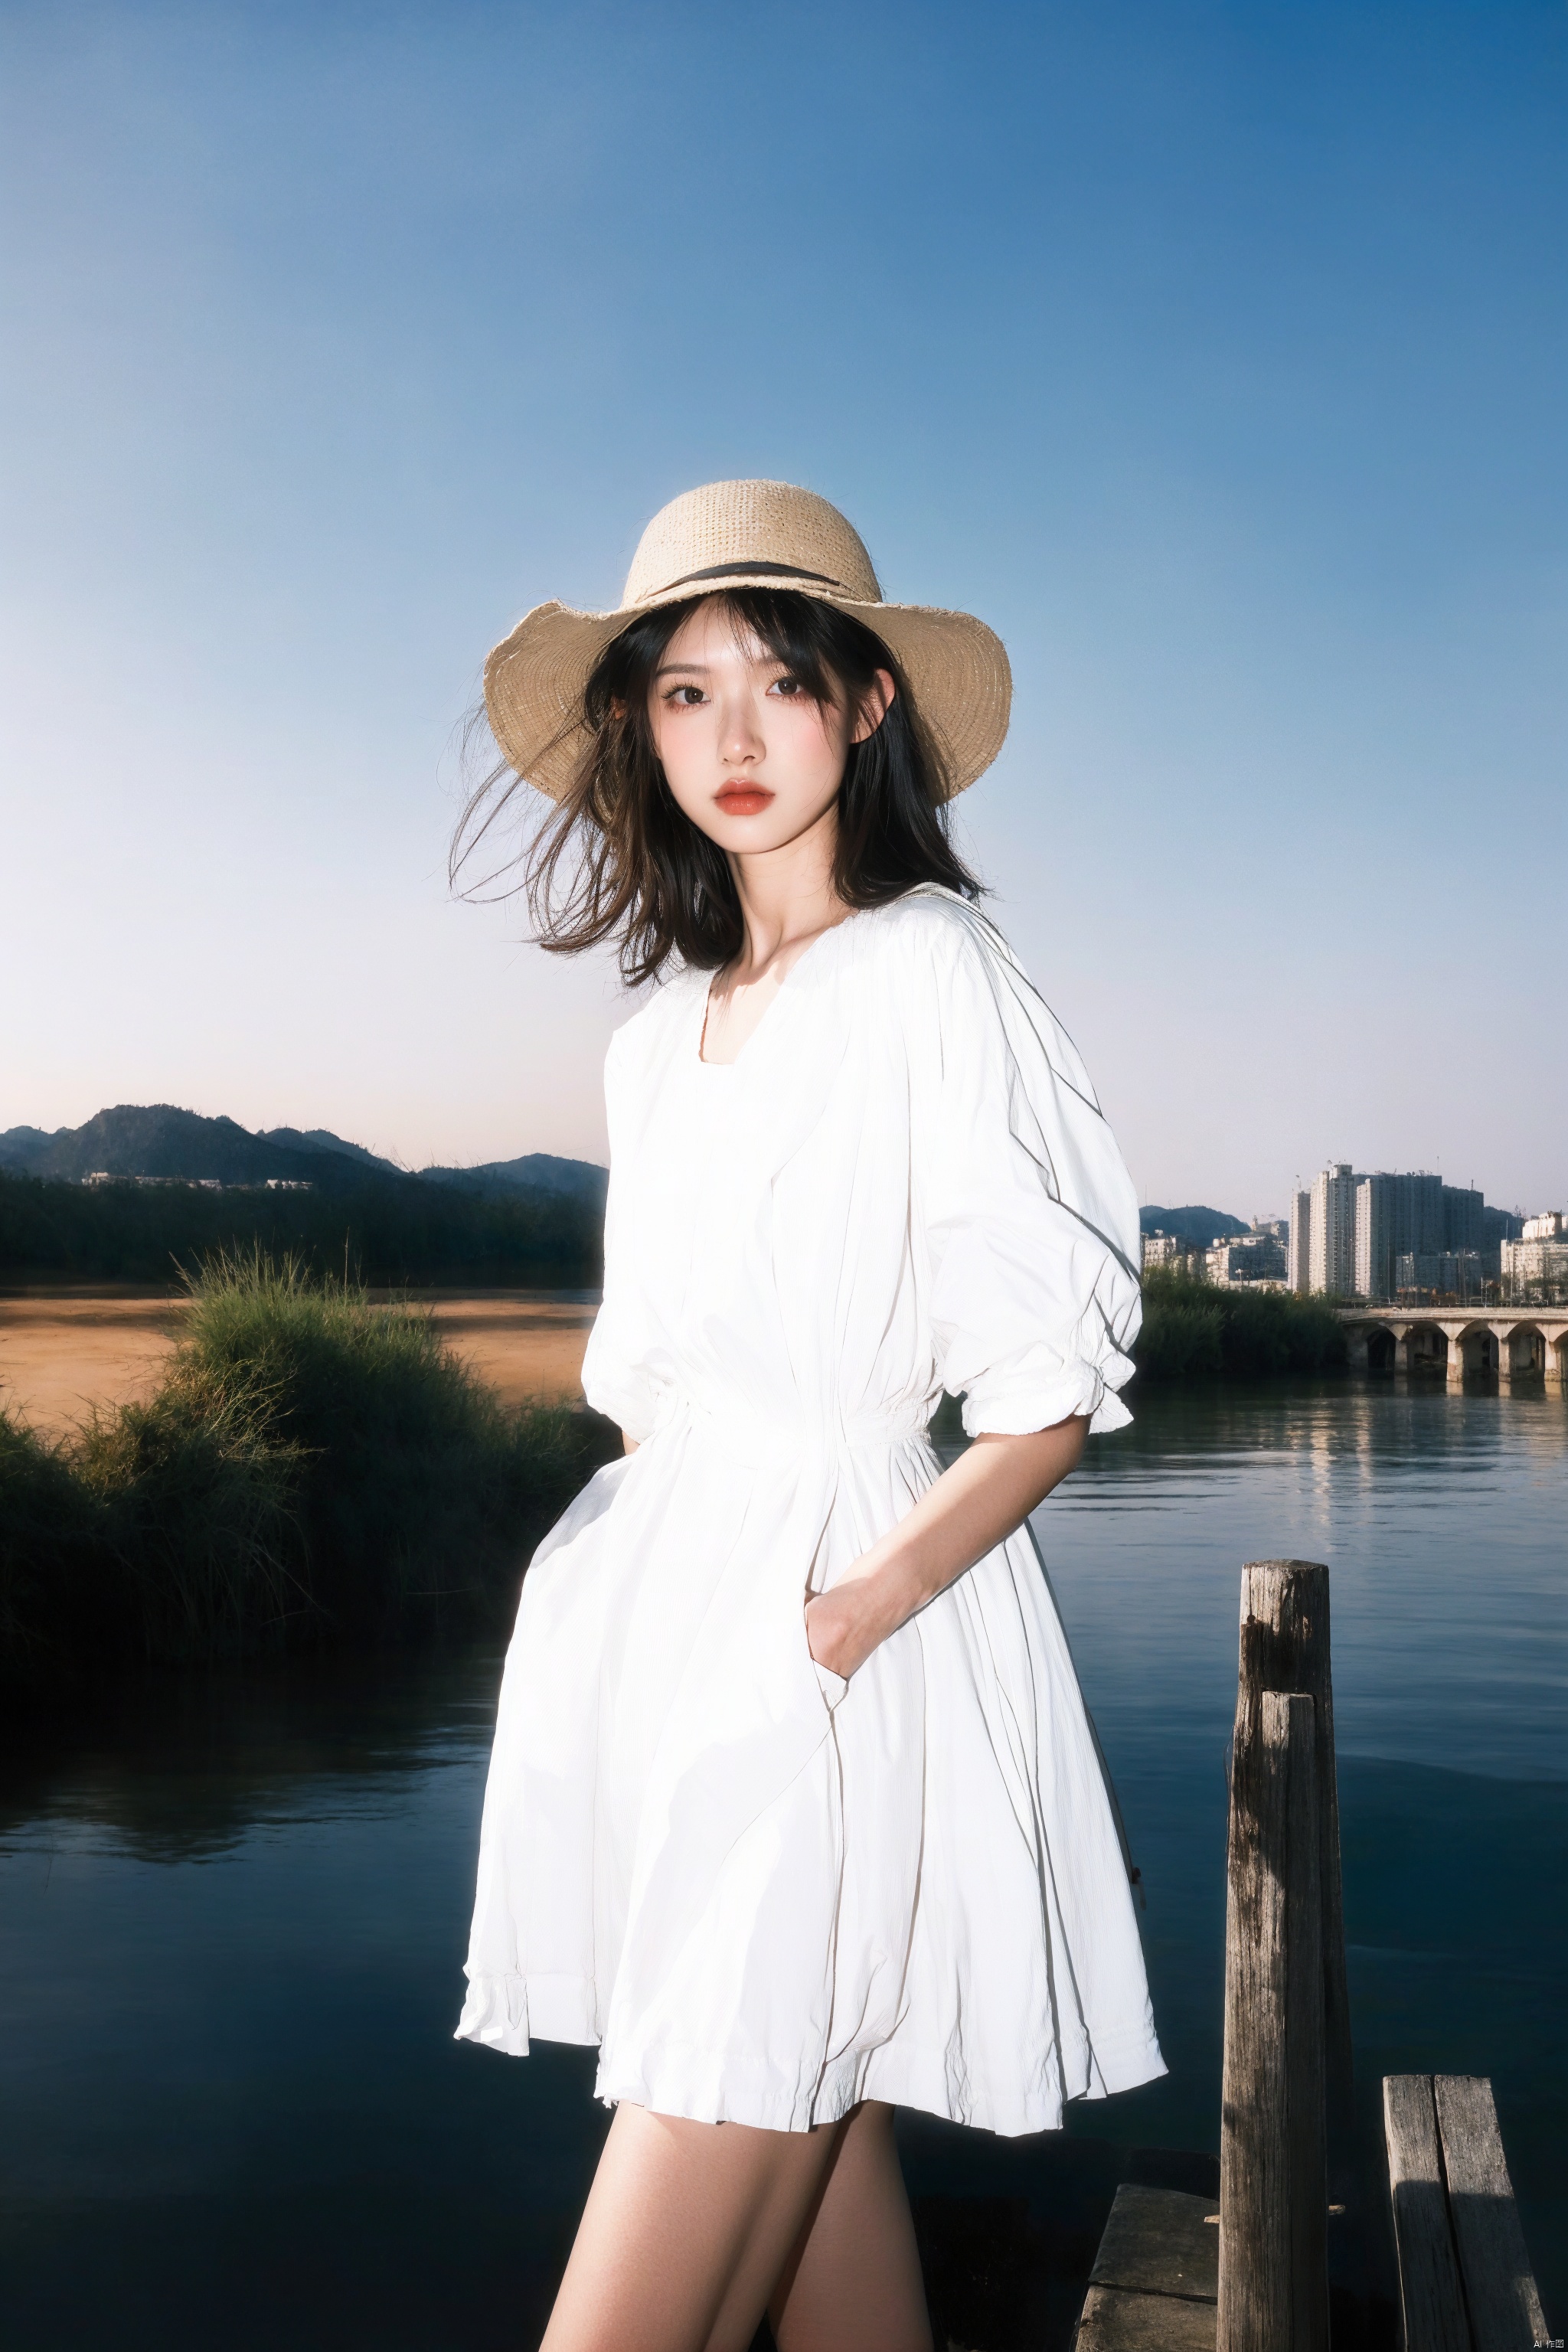 A girl, her hair flowing in the wind,Wearing a white dress, a white fisherman's hat, and a pair of white sports shoes. The scene is captured using a Fujifilm X-T3 with a 16-55mm f/2.8 lens, the image having a sharp and clear focus. The photograph has a sense of drama and tension, inspired by the works of Helmut Newton.